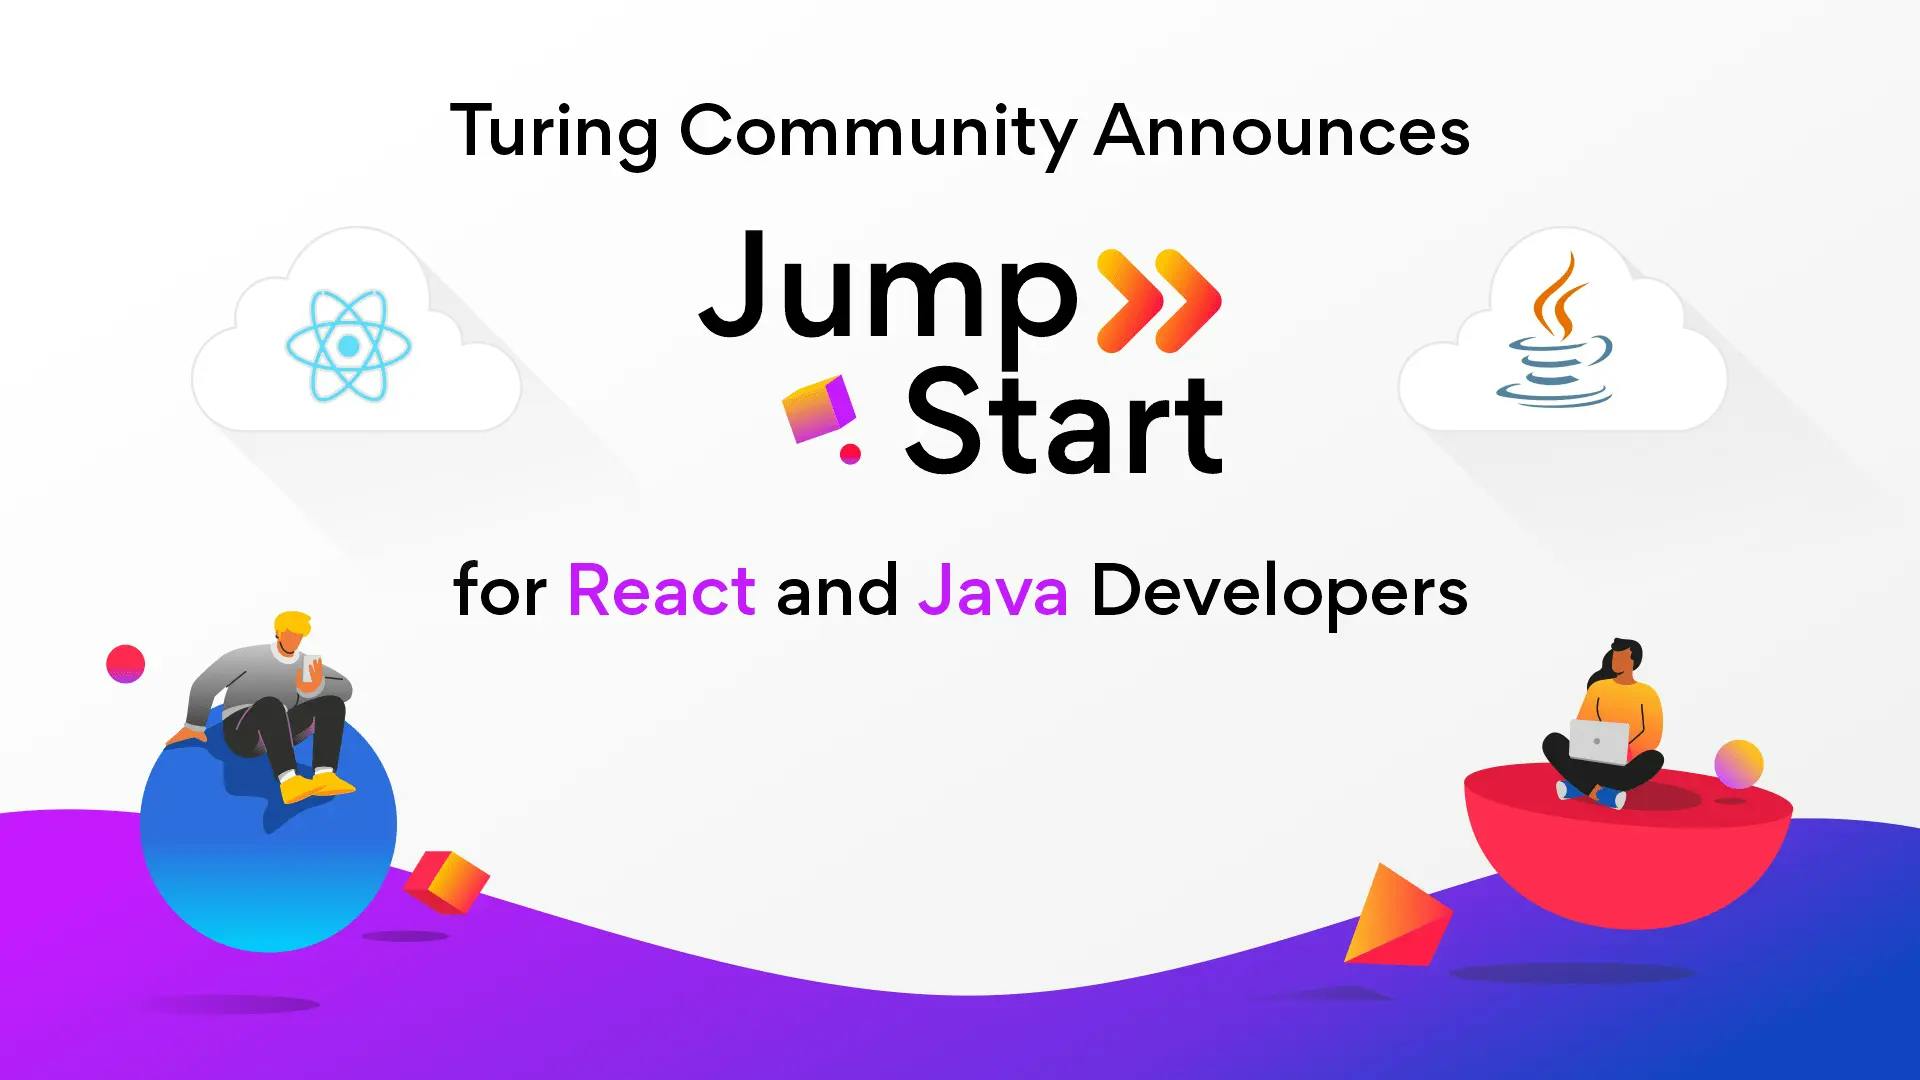 Turing Community Announces Jump Start for React and Java Developers!